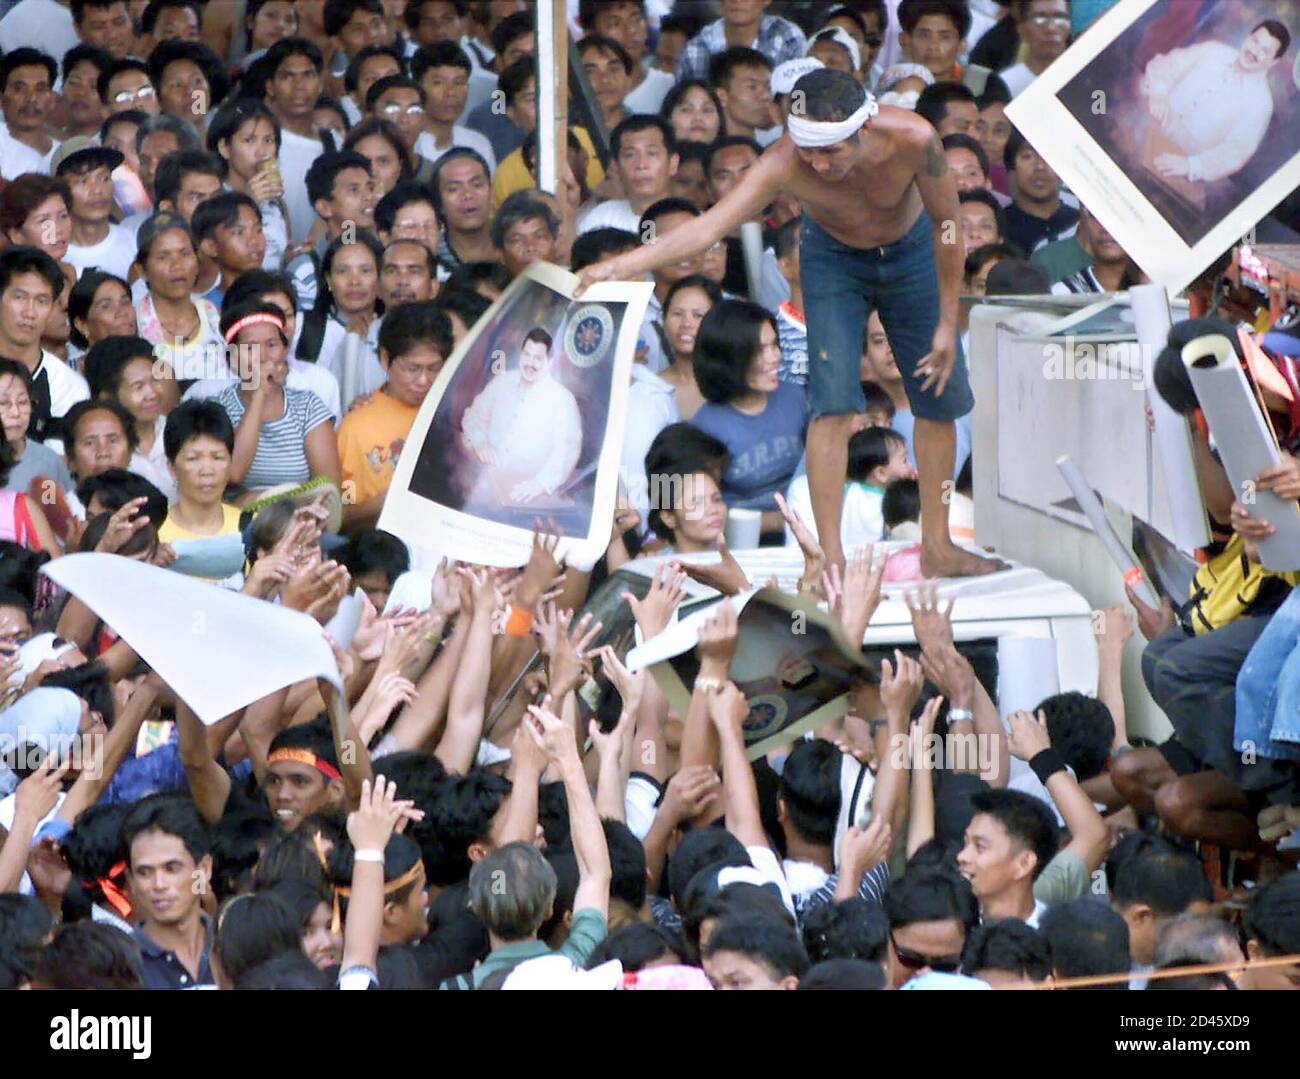 Suppporters of former president Joseph Estrada reach for posters of their fallen idol during a mass rally at a religious shrine in Manila April 29, 2001. Estrada, who is in police detention charged with economic plunder, called for a nationwide protest against the government of [Philippine President Gloria Macapagal Arroyo in a taped message played early Sunday.] Stock Photo